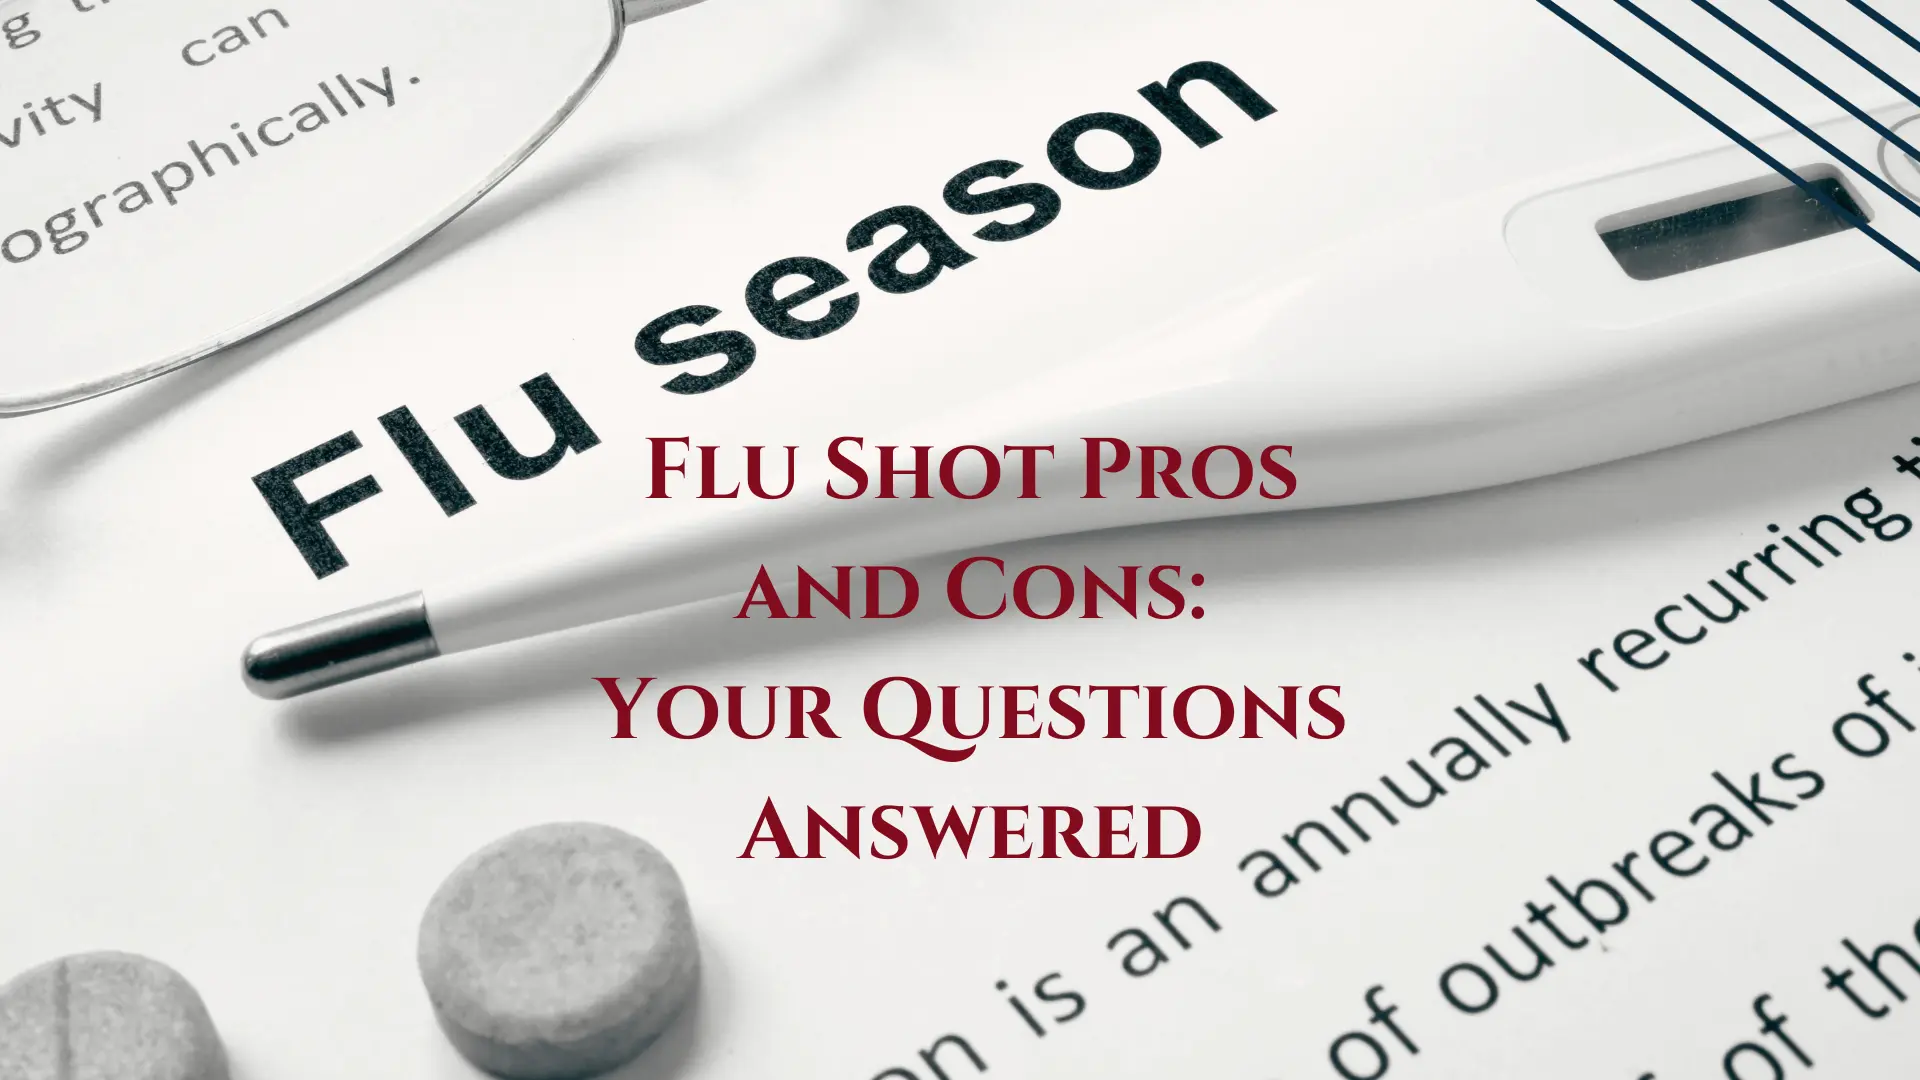 Flu Shot Pros and Cons: Your Questions Answered